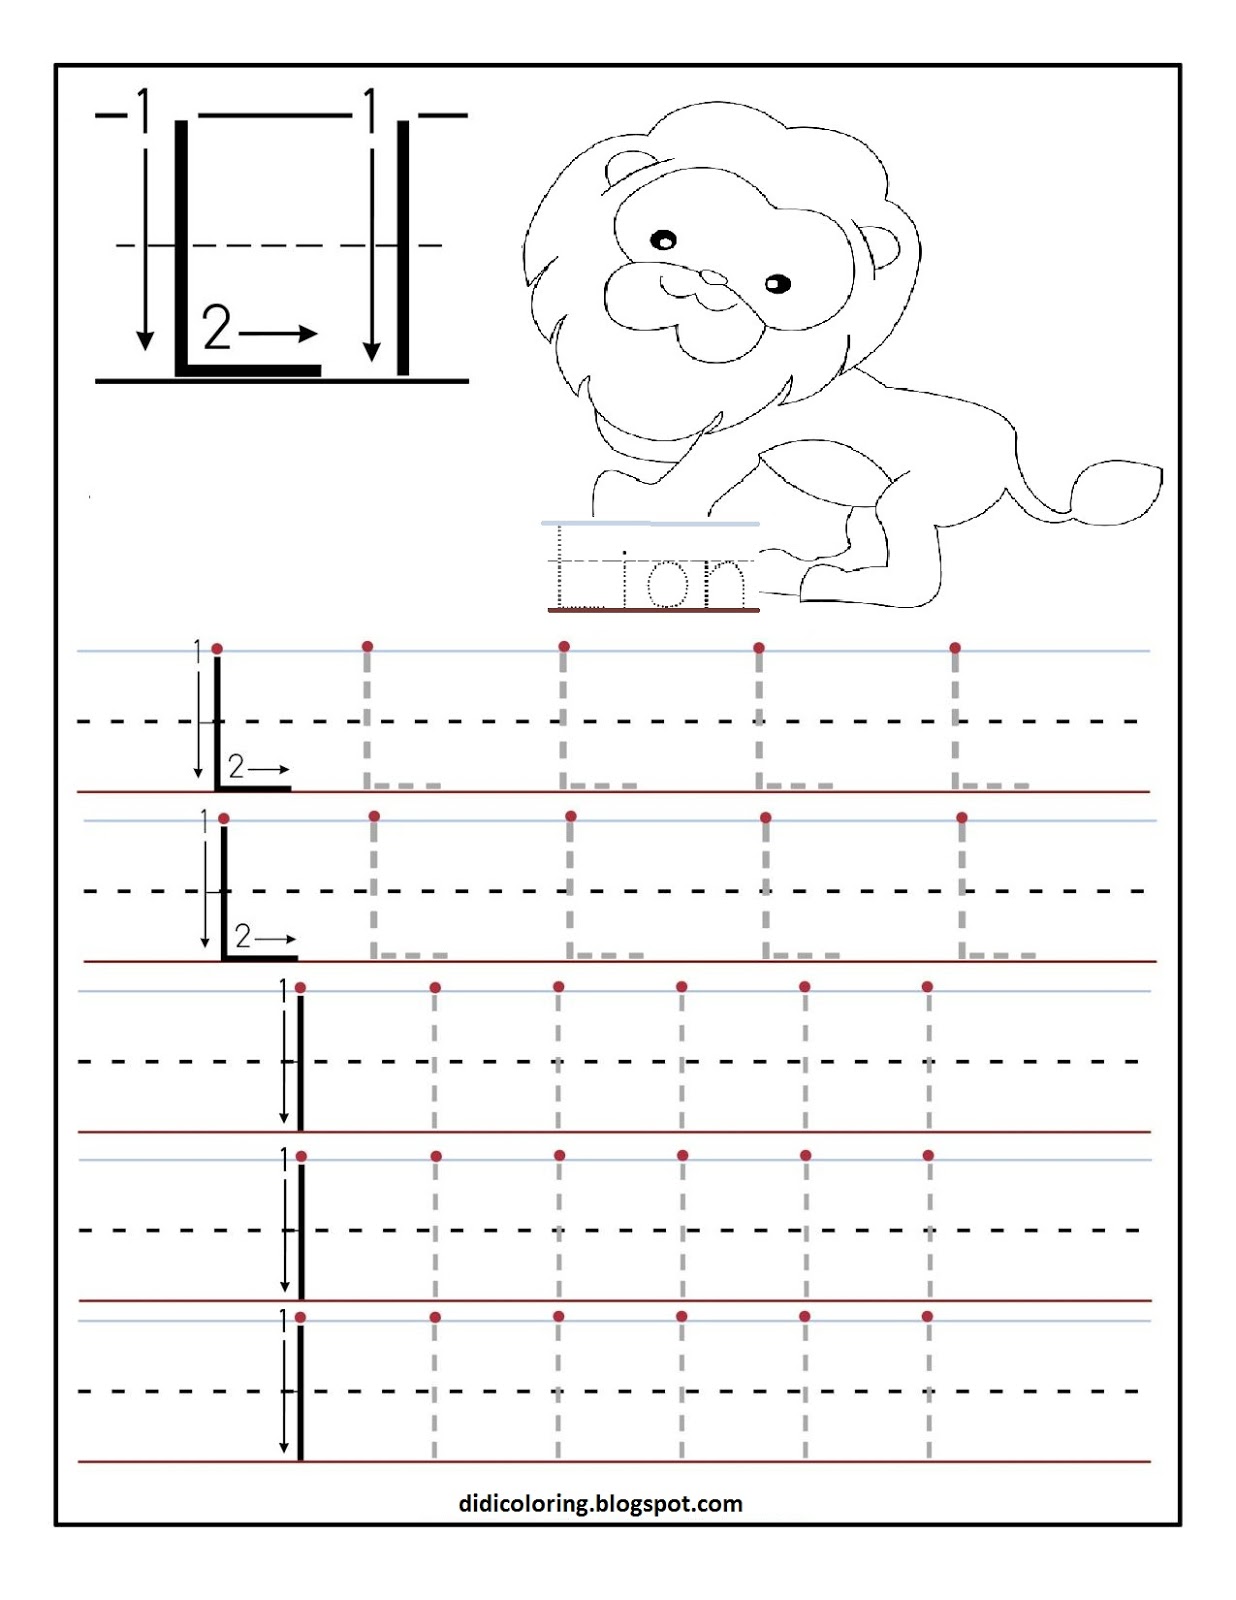 free-printable-worksheet-letter-l-for-your-child-to-learn-and-write-didi-coloring-page